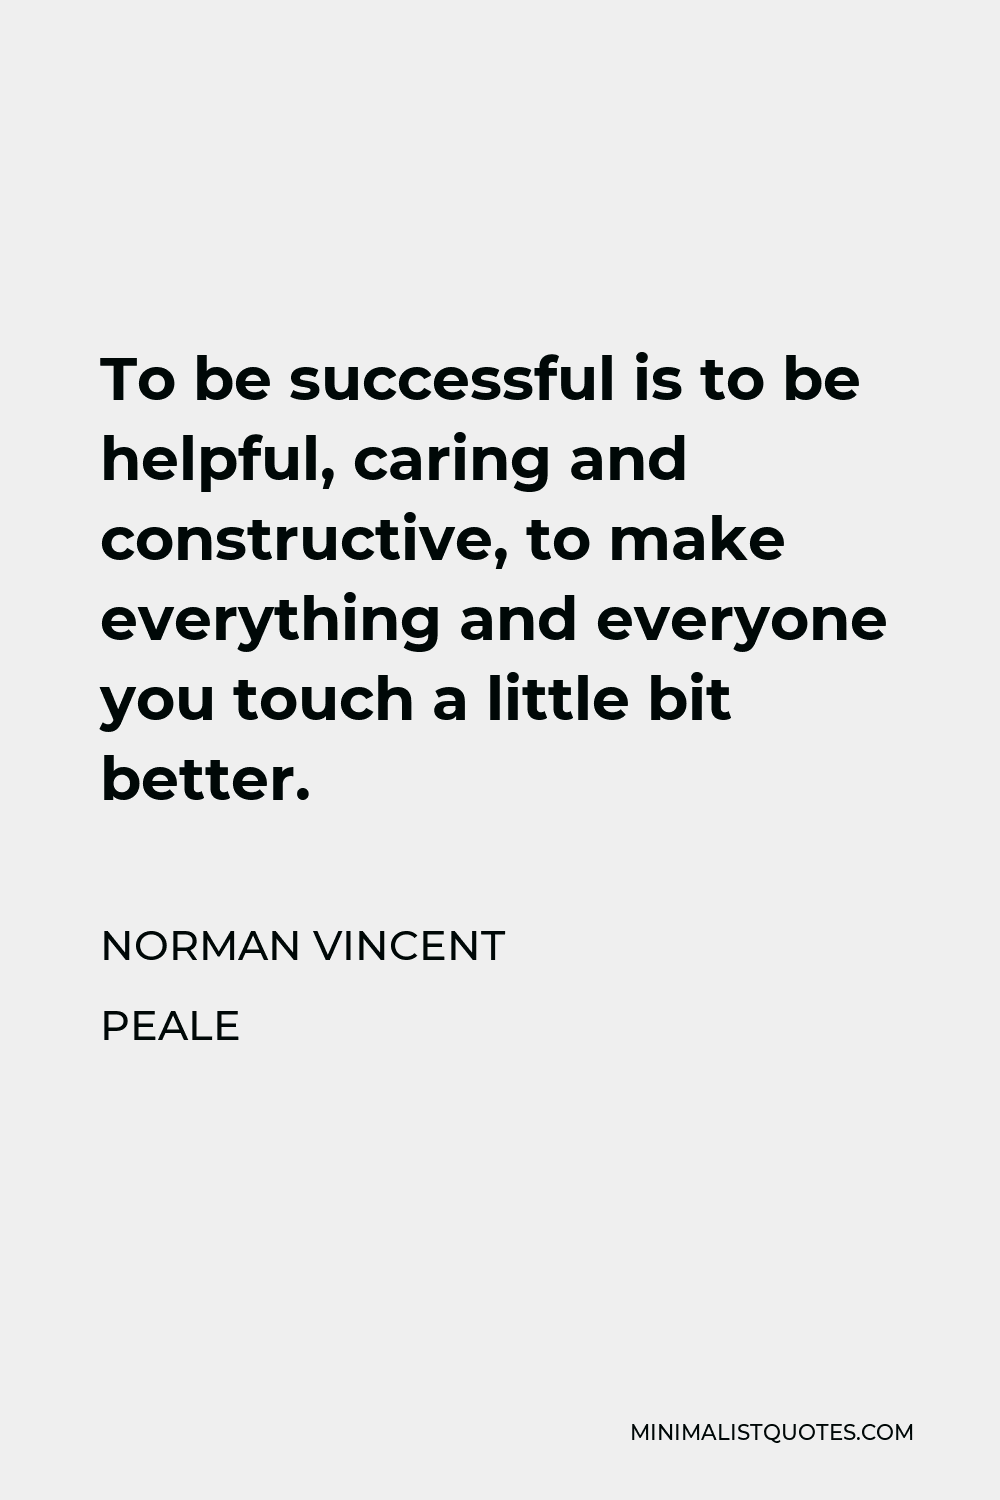 Norman Vincent Peale Quote - To be successful is to be helpful, caring and constructive, to make everything and everyone you touch a little bit better.